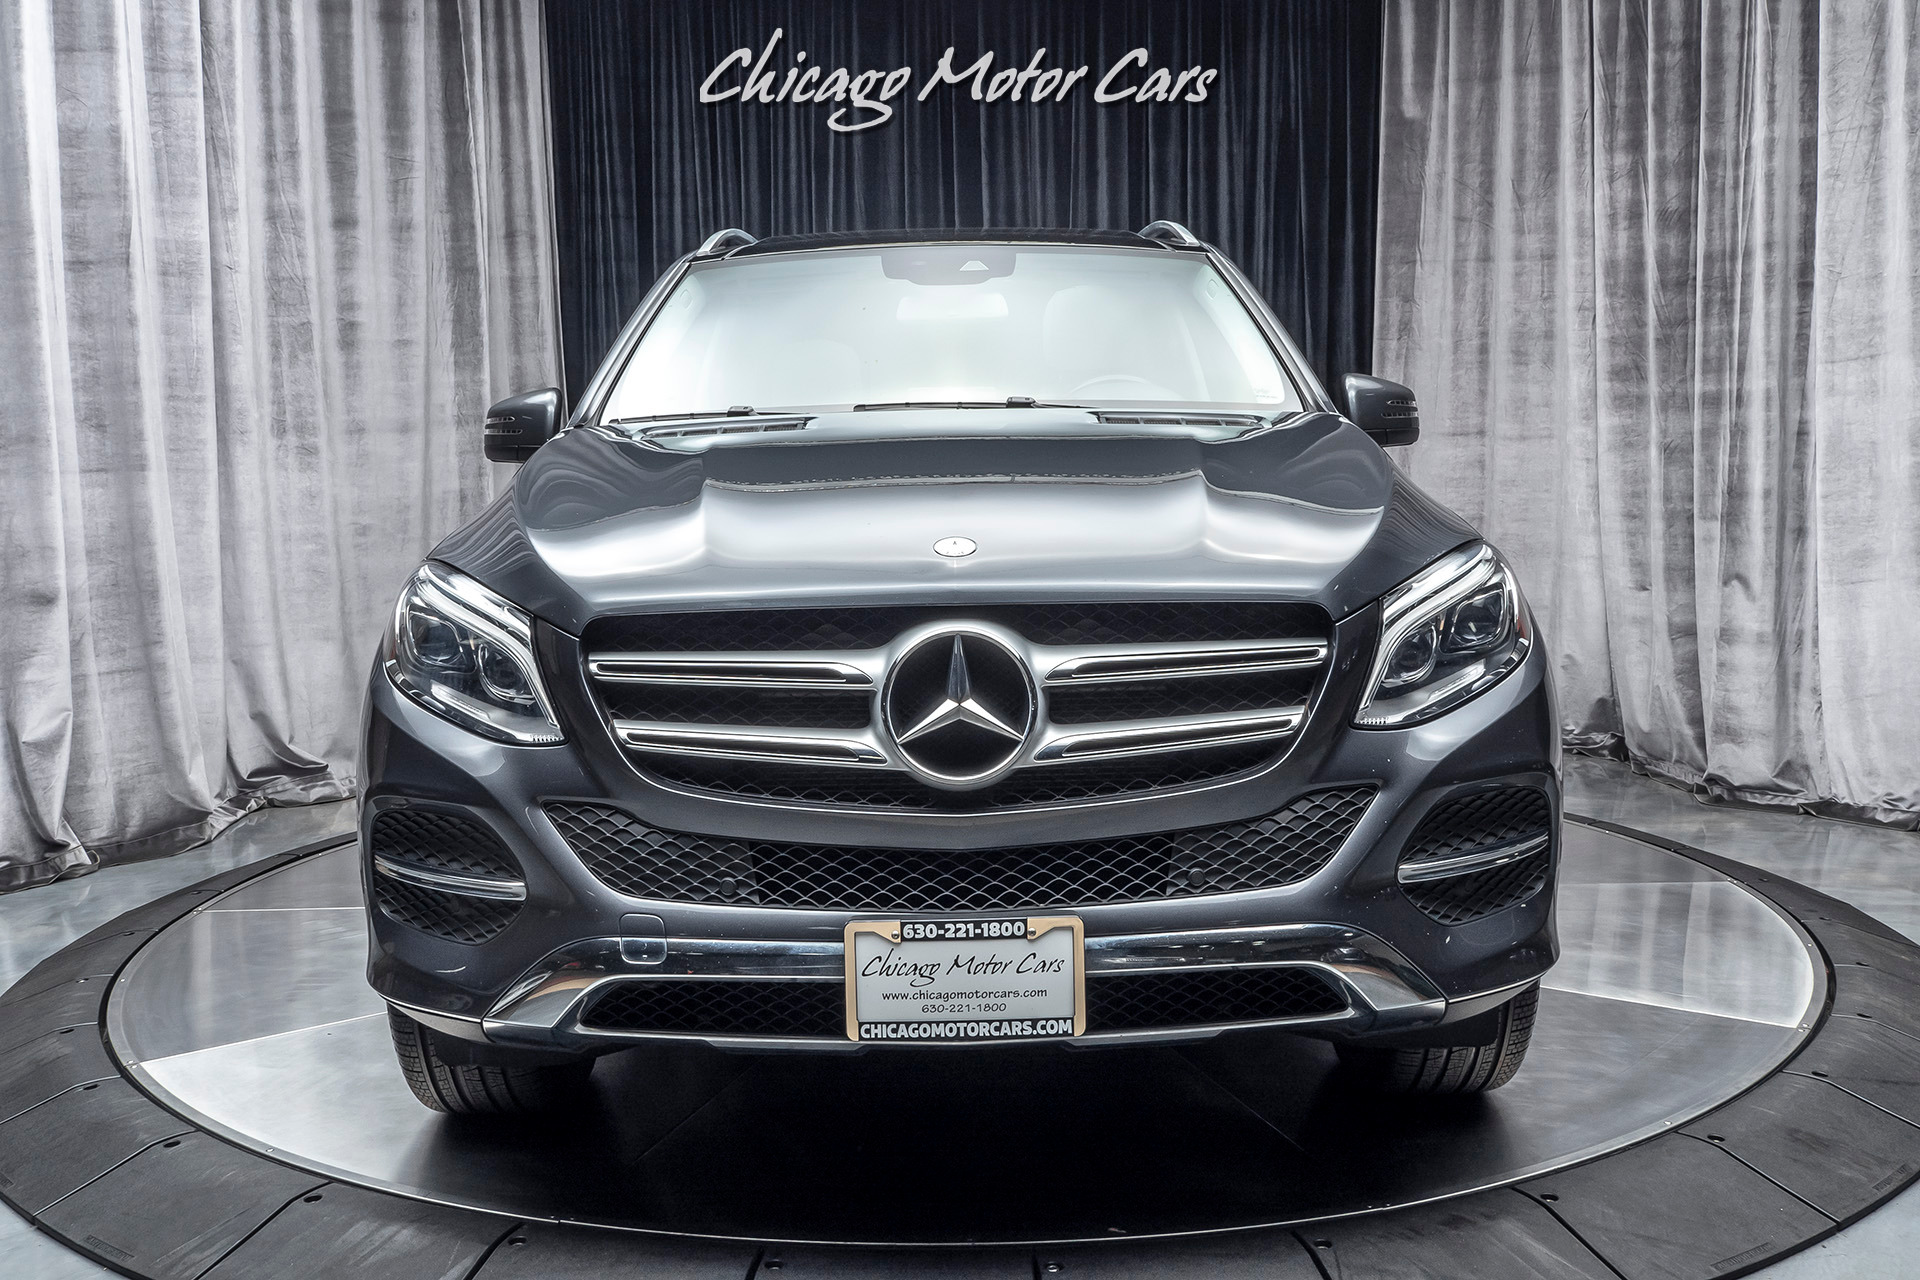 Used 2016 Mercedes Benz Gle 350 4matic Suv Msrp 69k